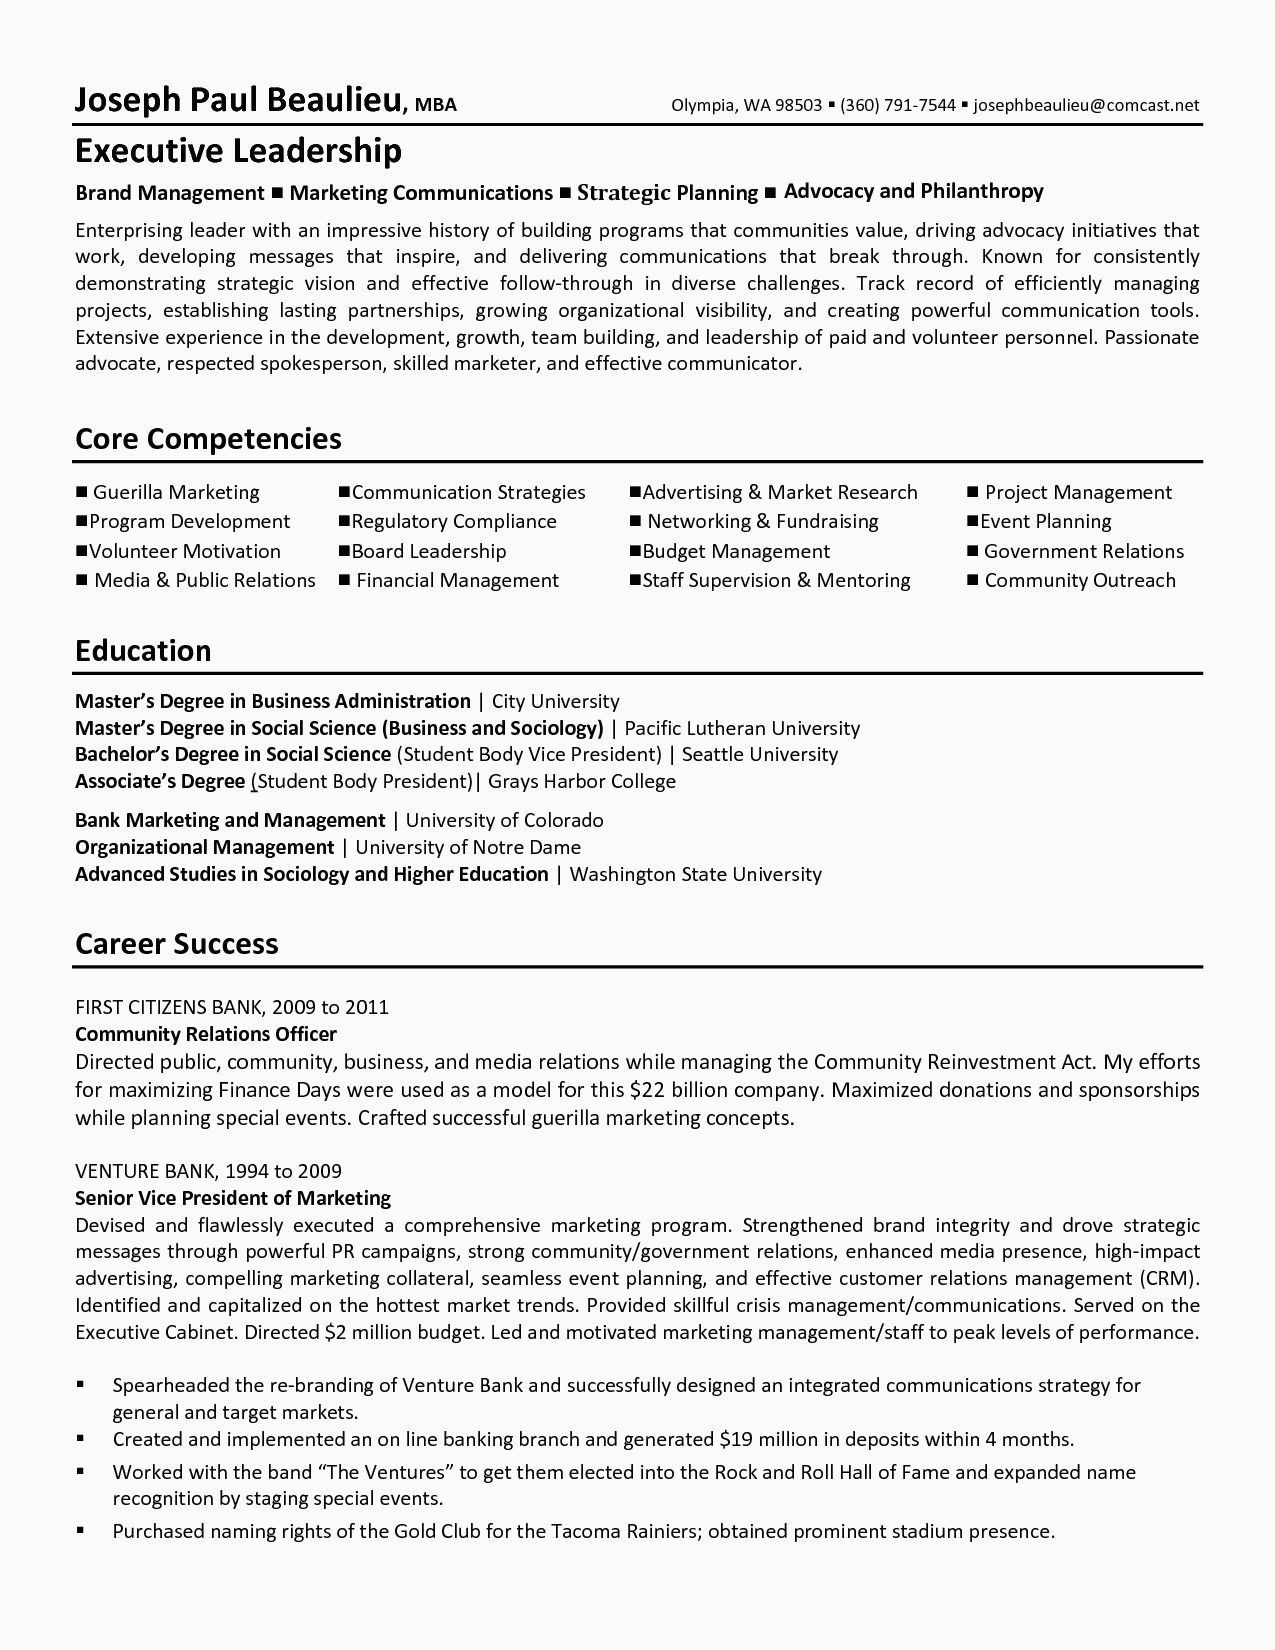 Sample Resume for Nonprofit Executive Director Resume Examples Nonprofit Examples Nonprofit Resume